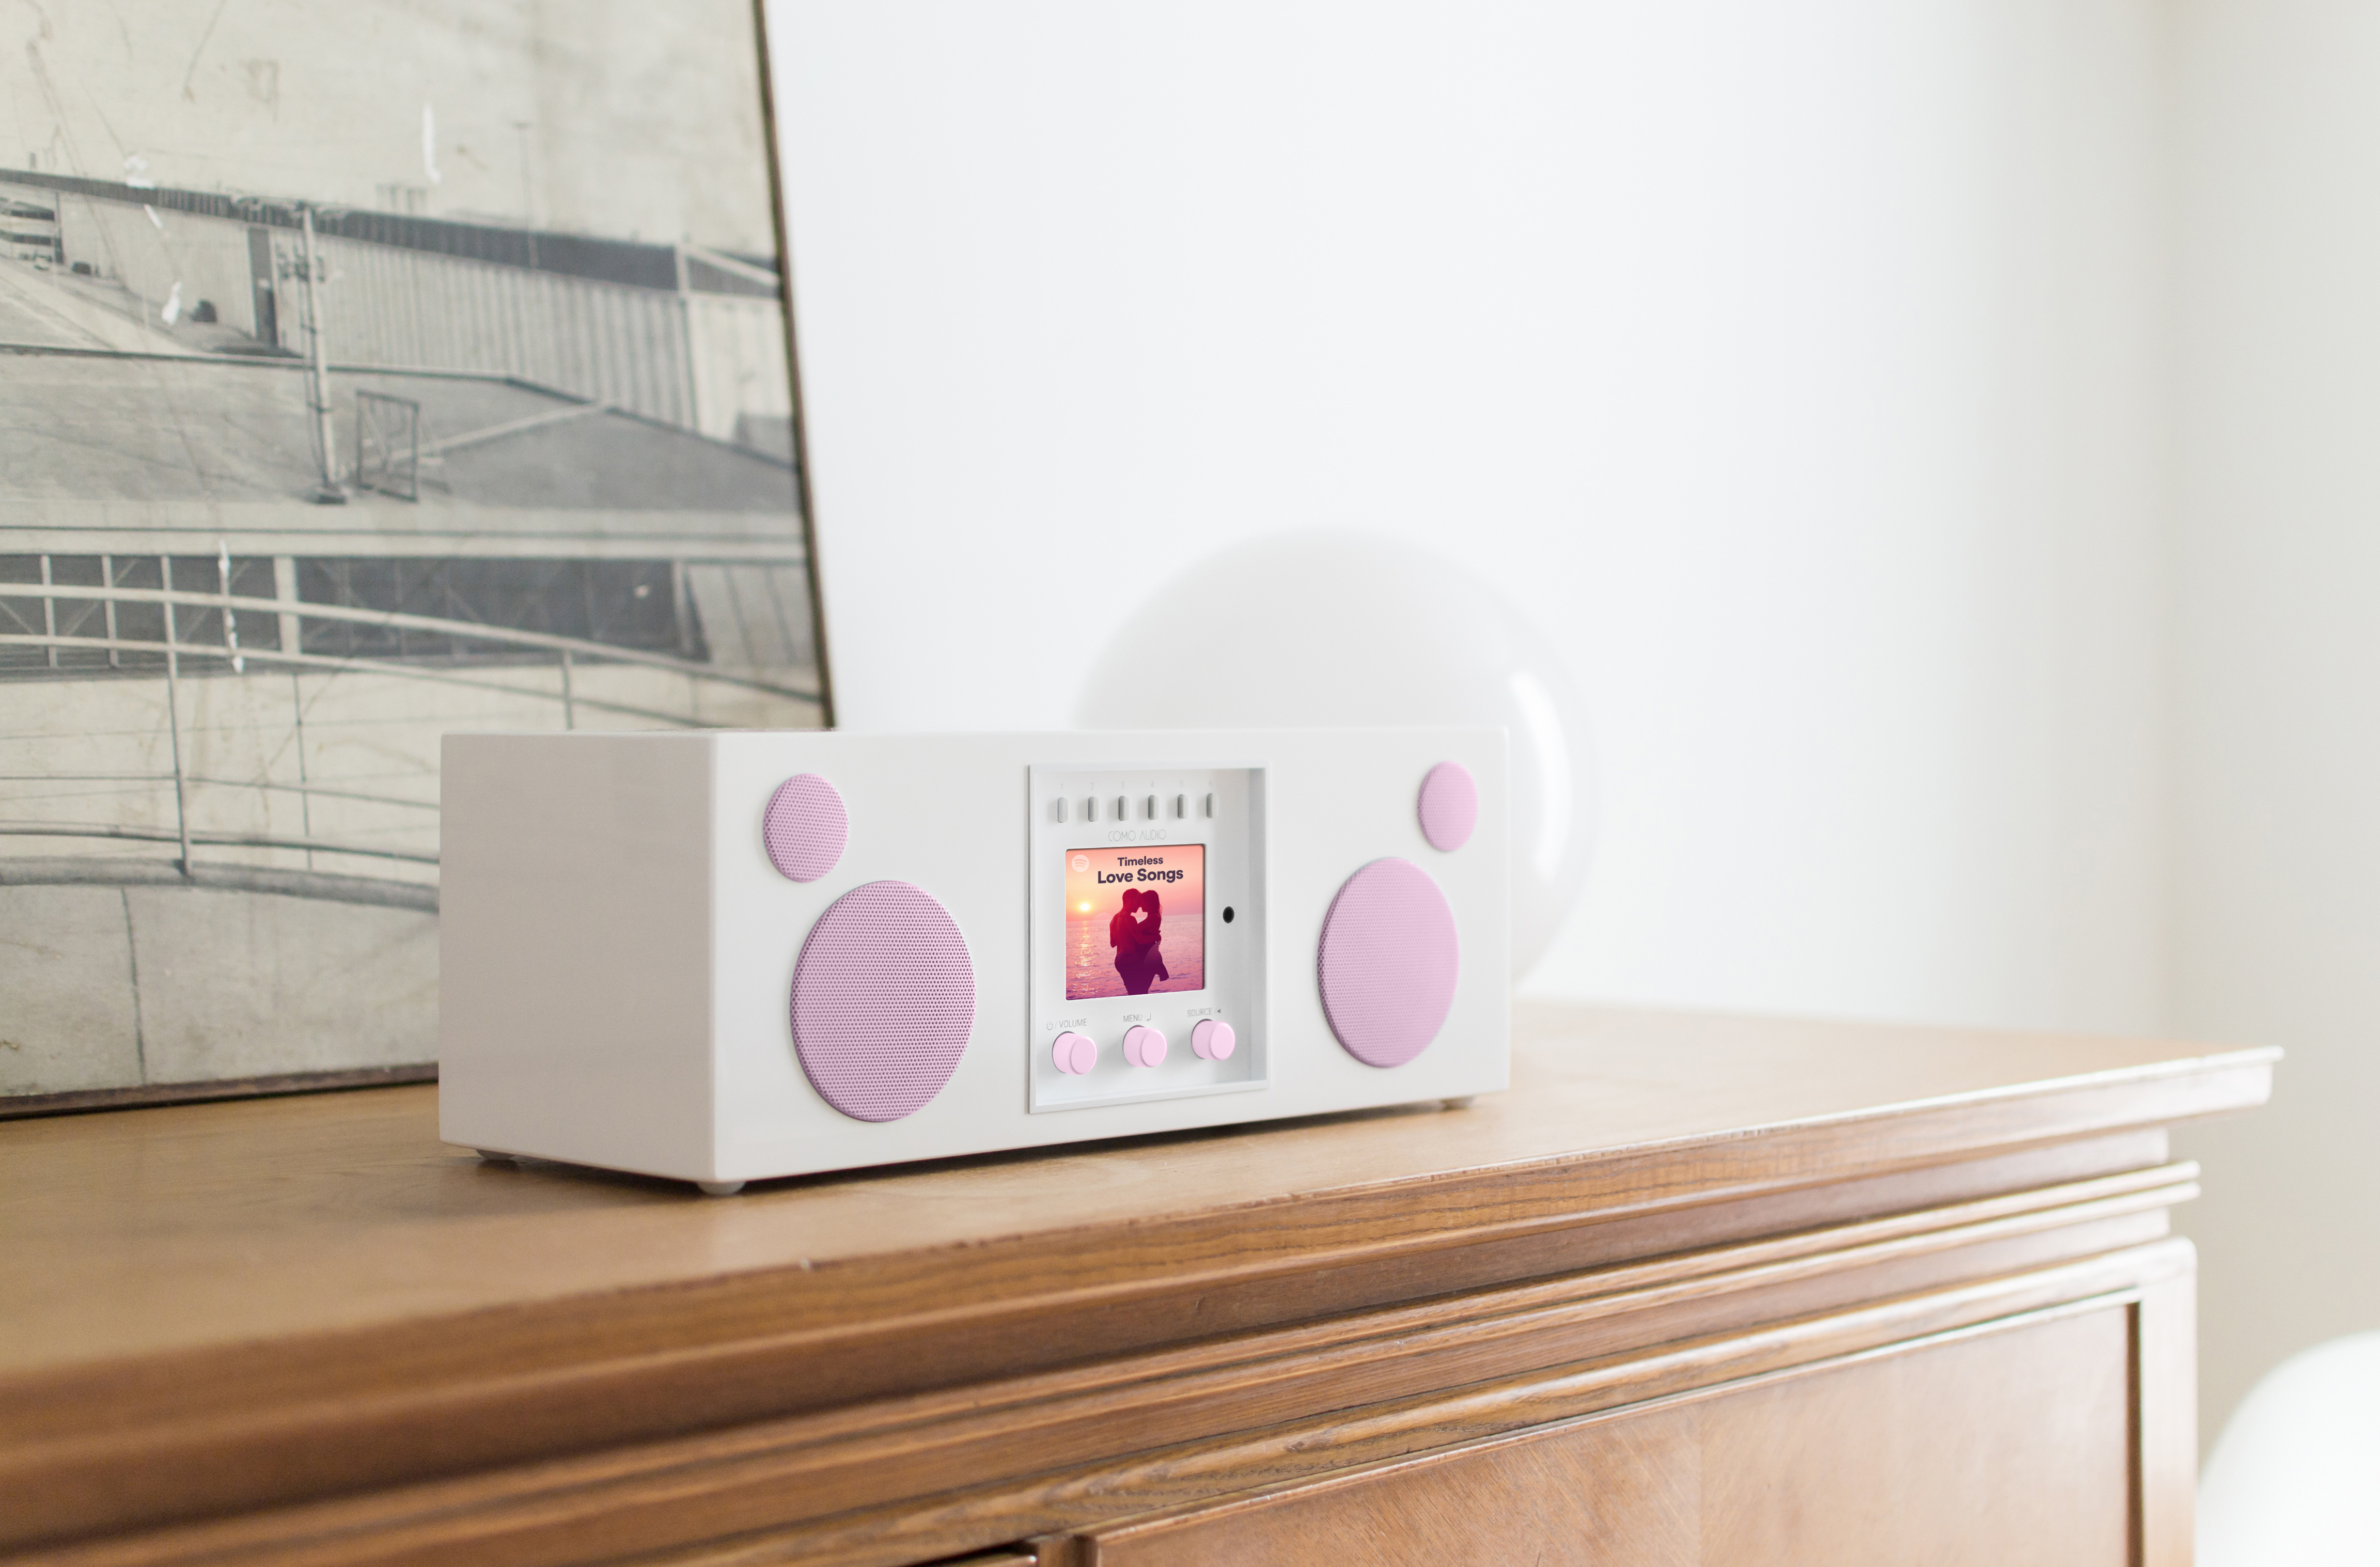 Special Edition Valentine Radios from Como Audio for Those Who Make Beautiful Music Together